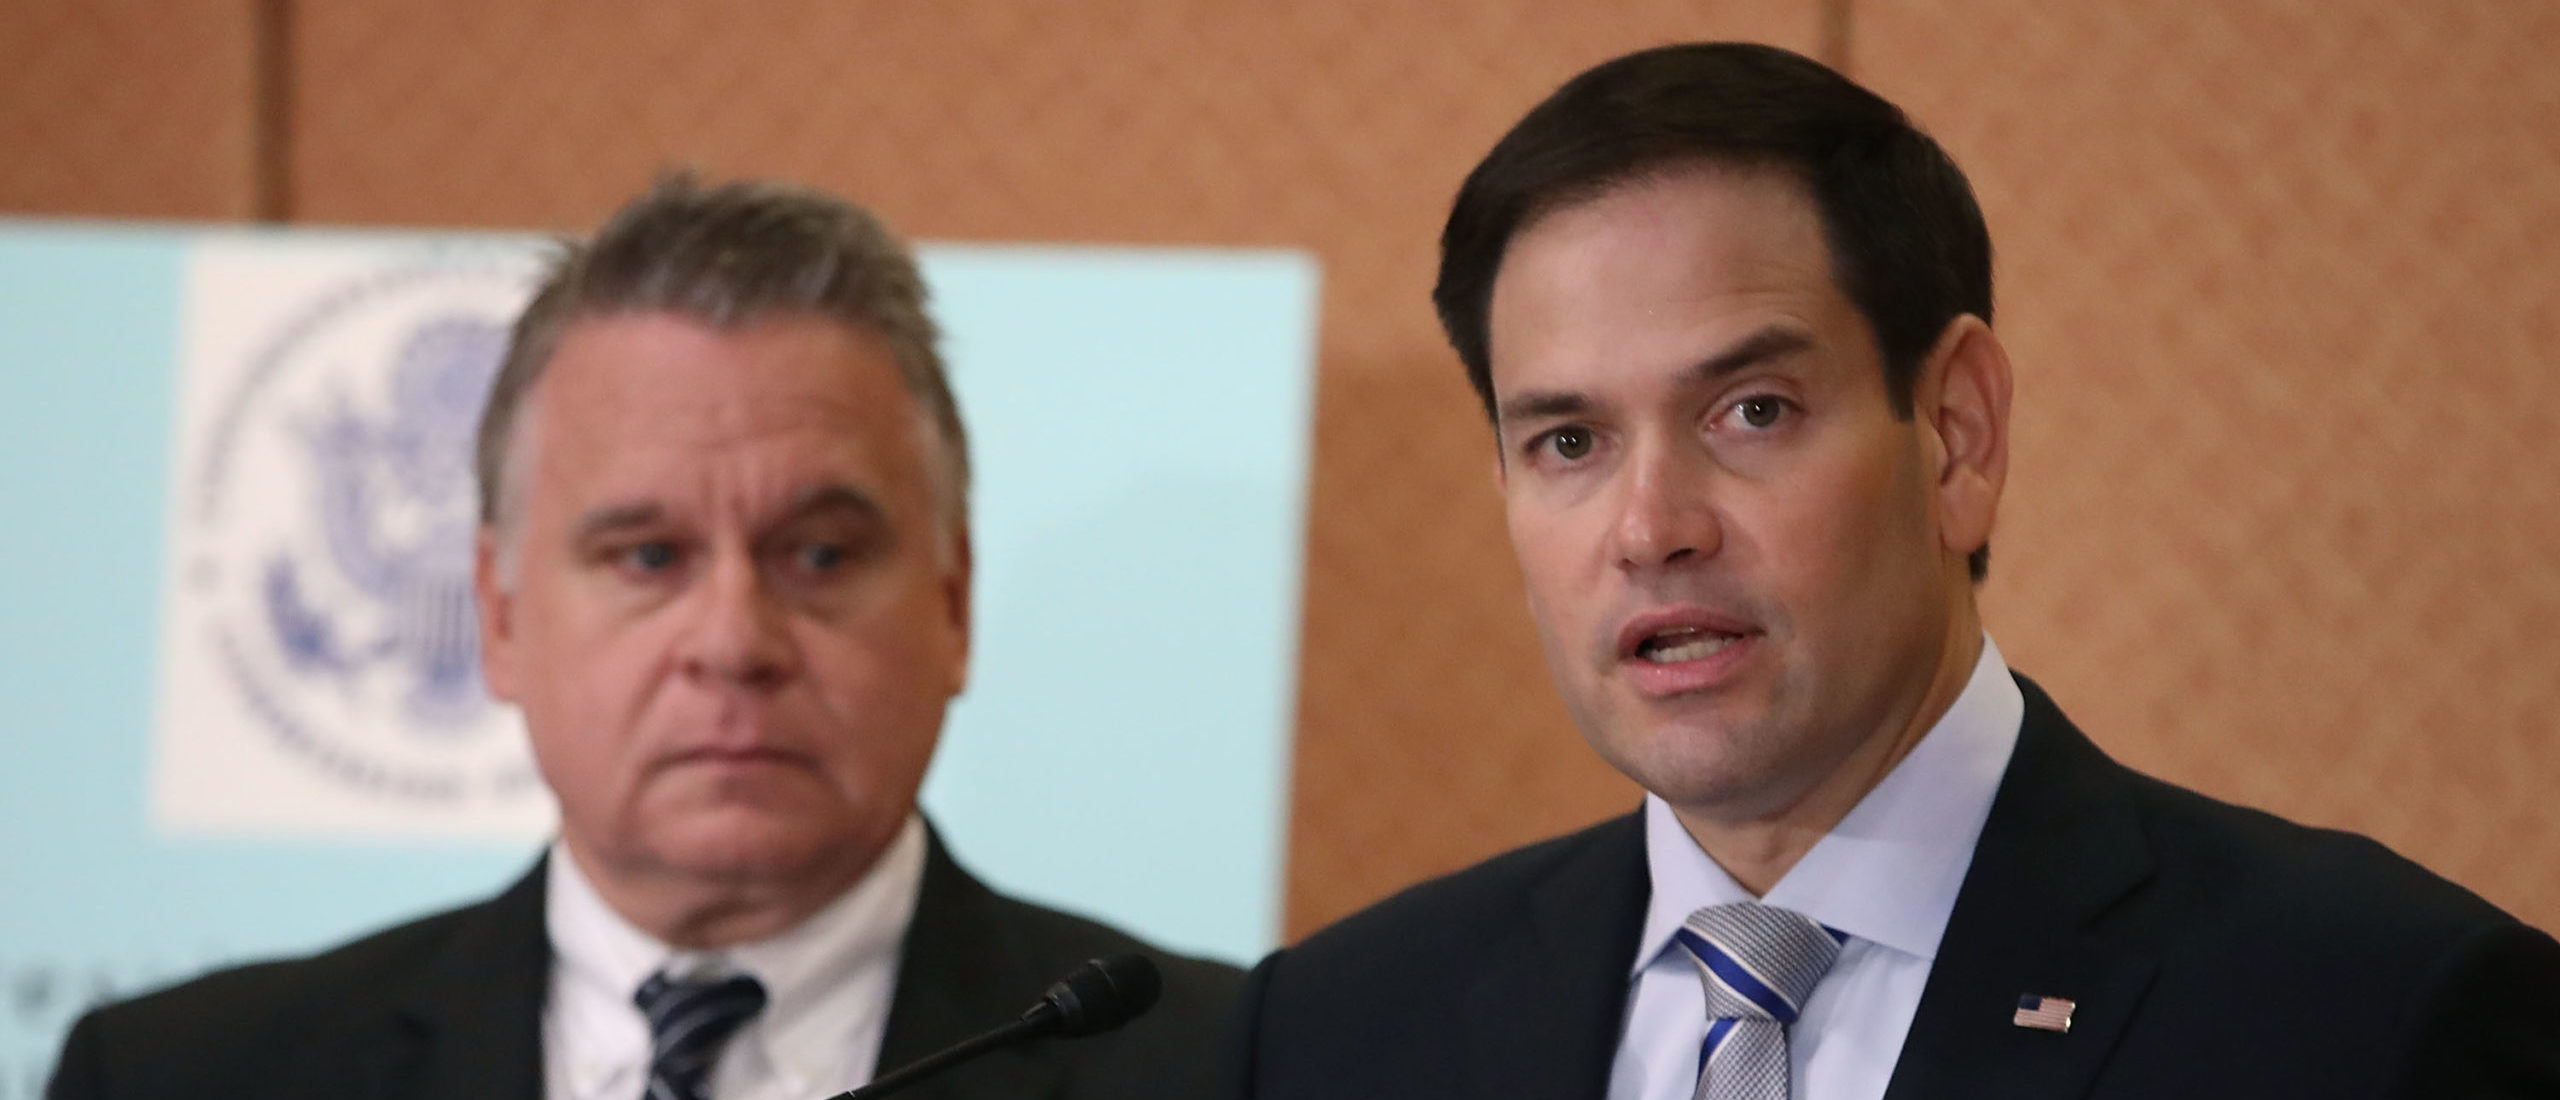 Sen. Marco Rubio and Rep. Chris Smith on October 10, 2018. (Photo by Mark Wilson/Getty Images)